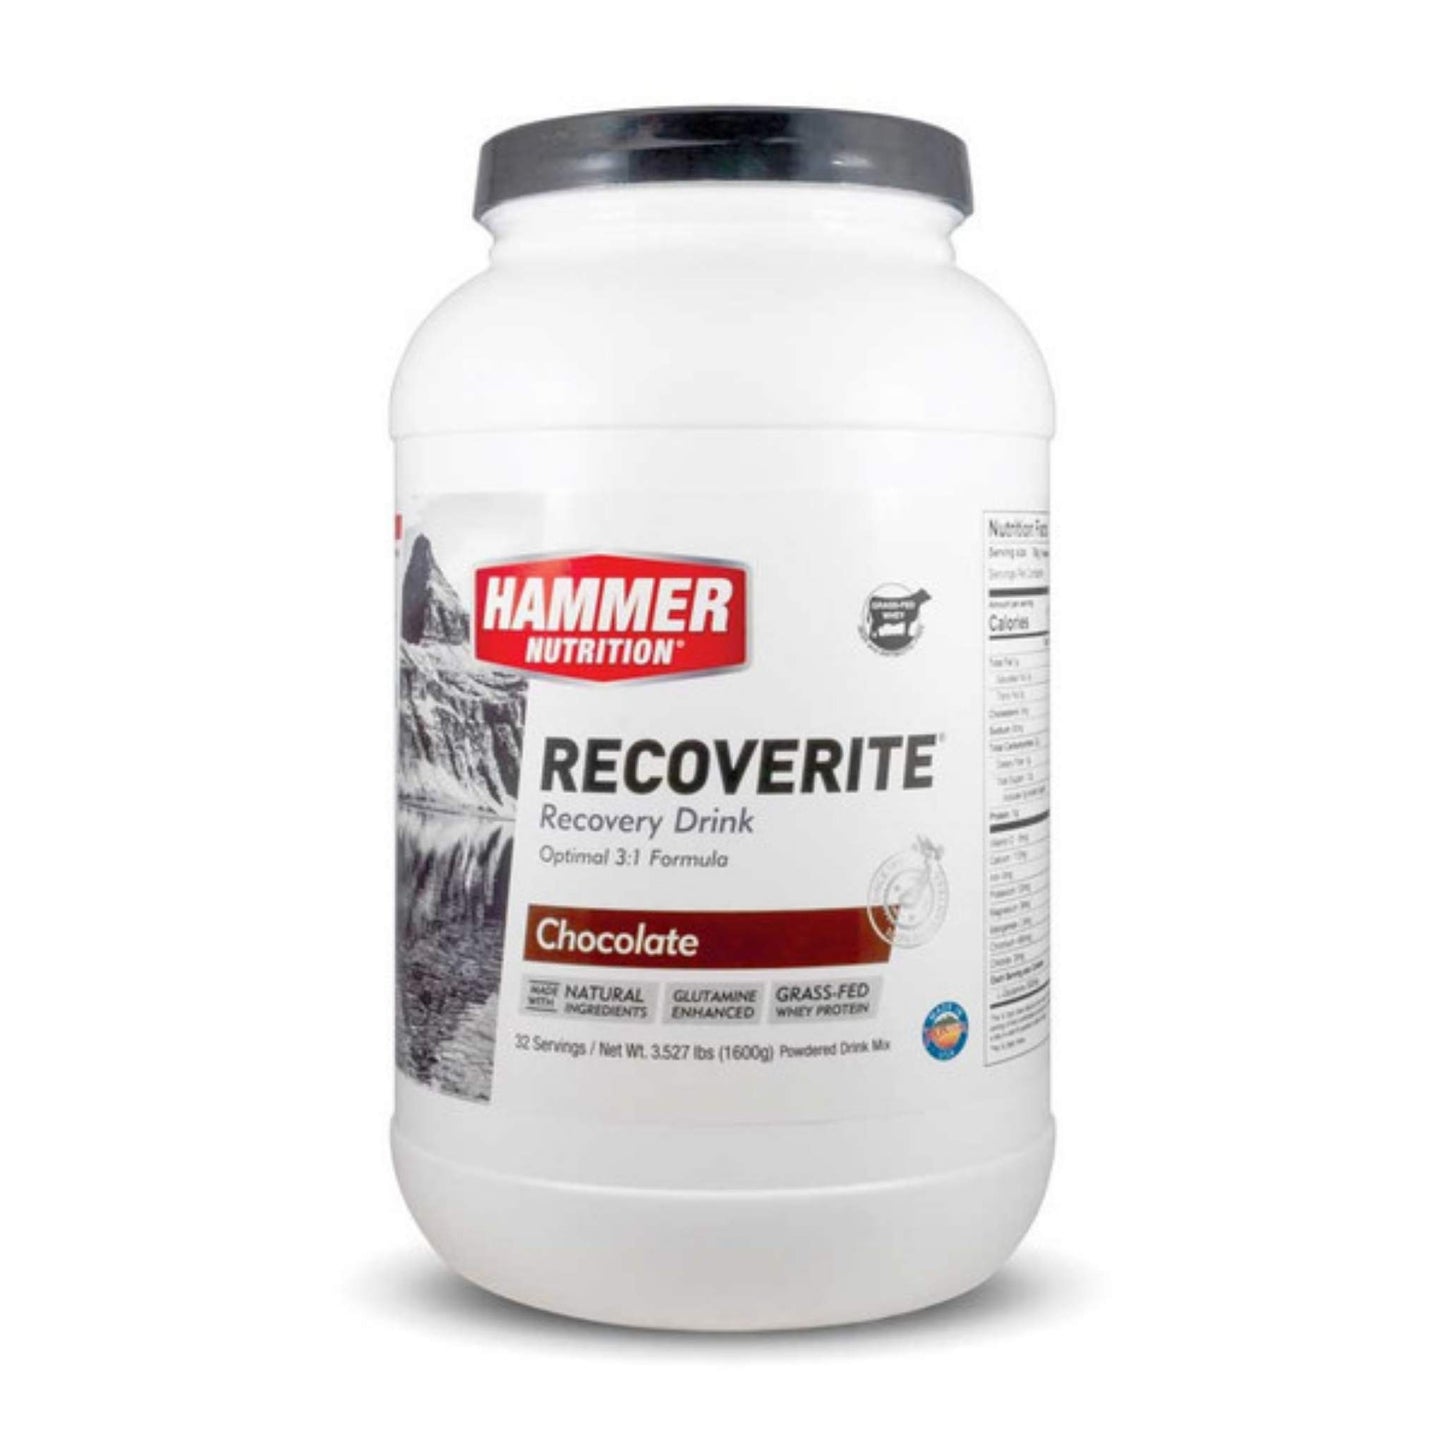 Hammer Nutrition - Recoverite, Chocolate, 32 Servings, Team Perfect